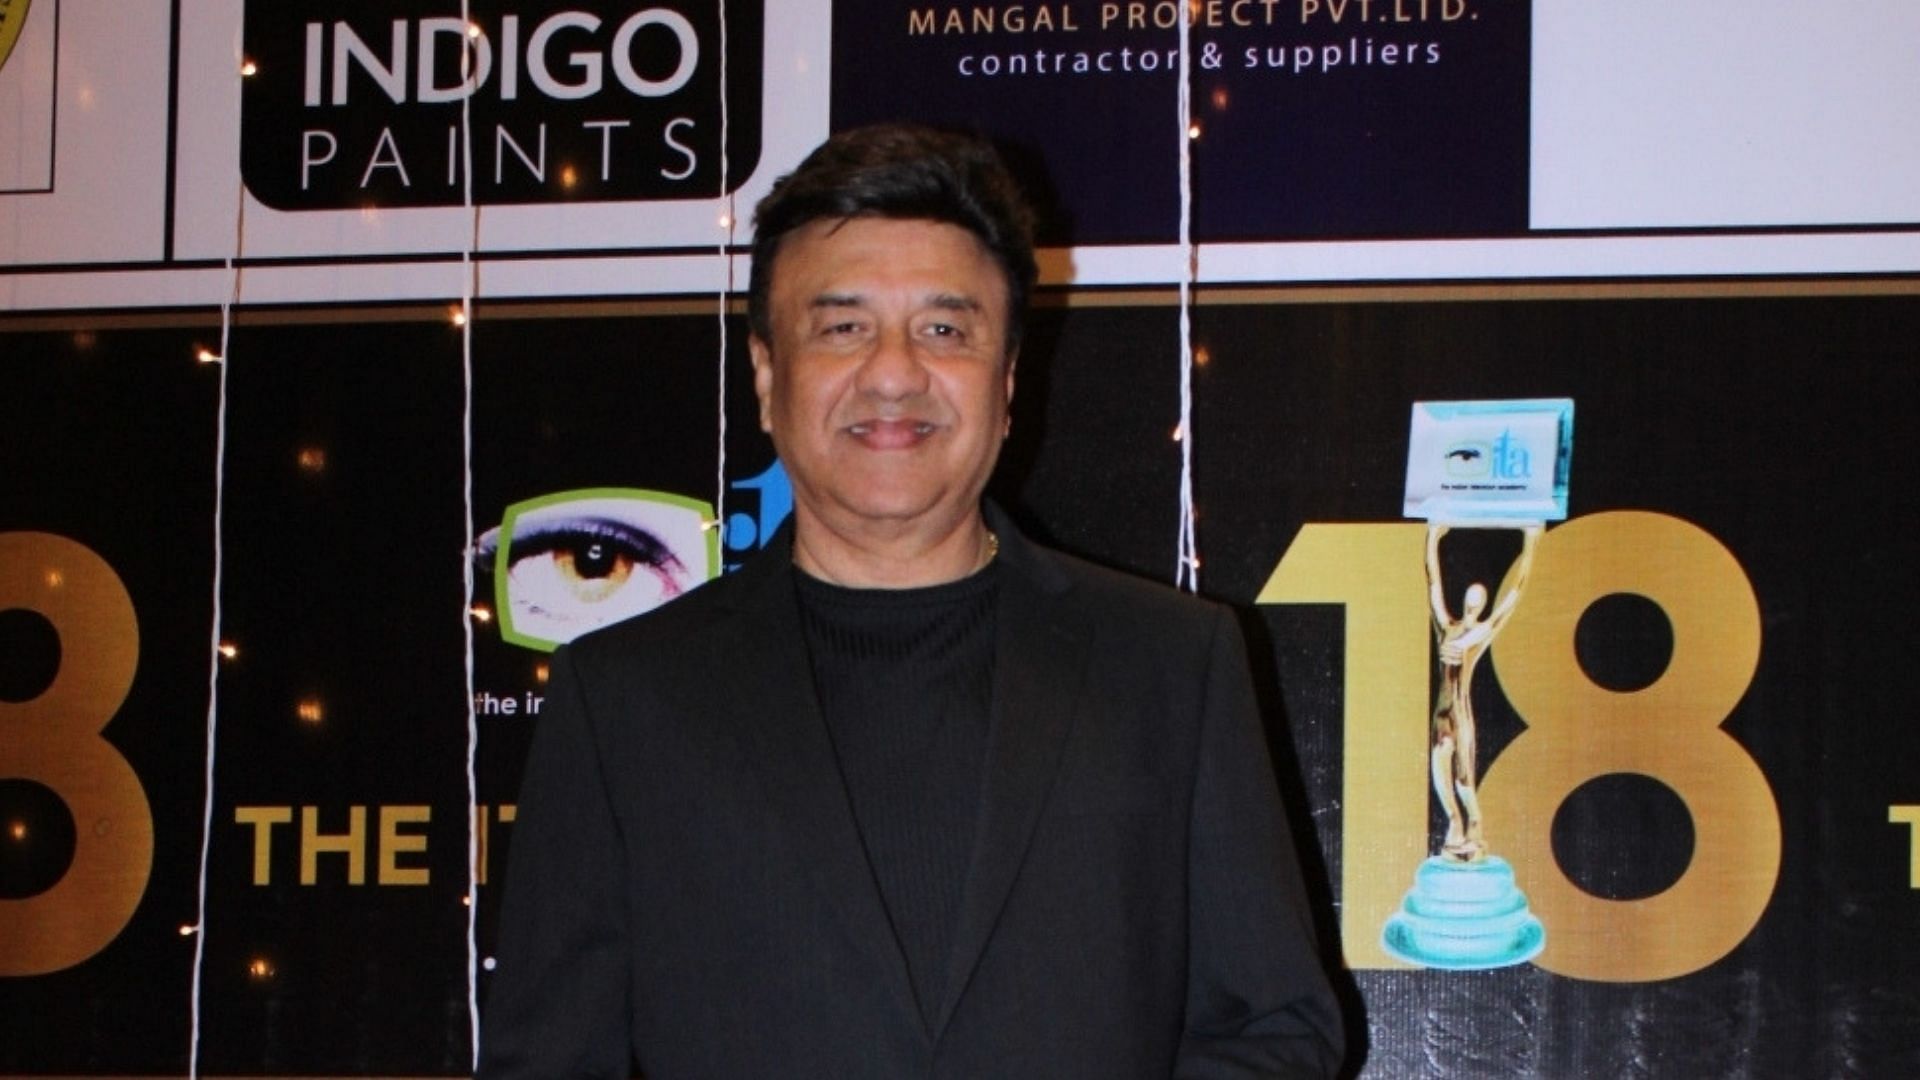 Anu Malik stepped down as a judge on <i>Indian Idol</i> in October 2018 following #MeToo allegations.